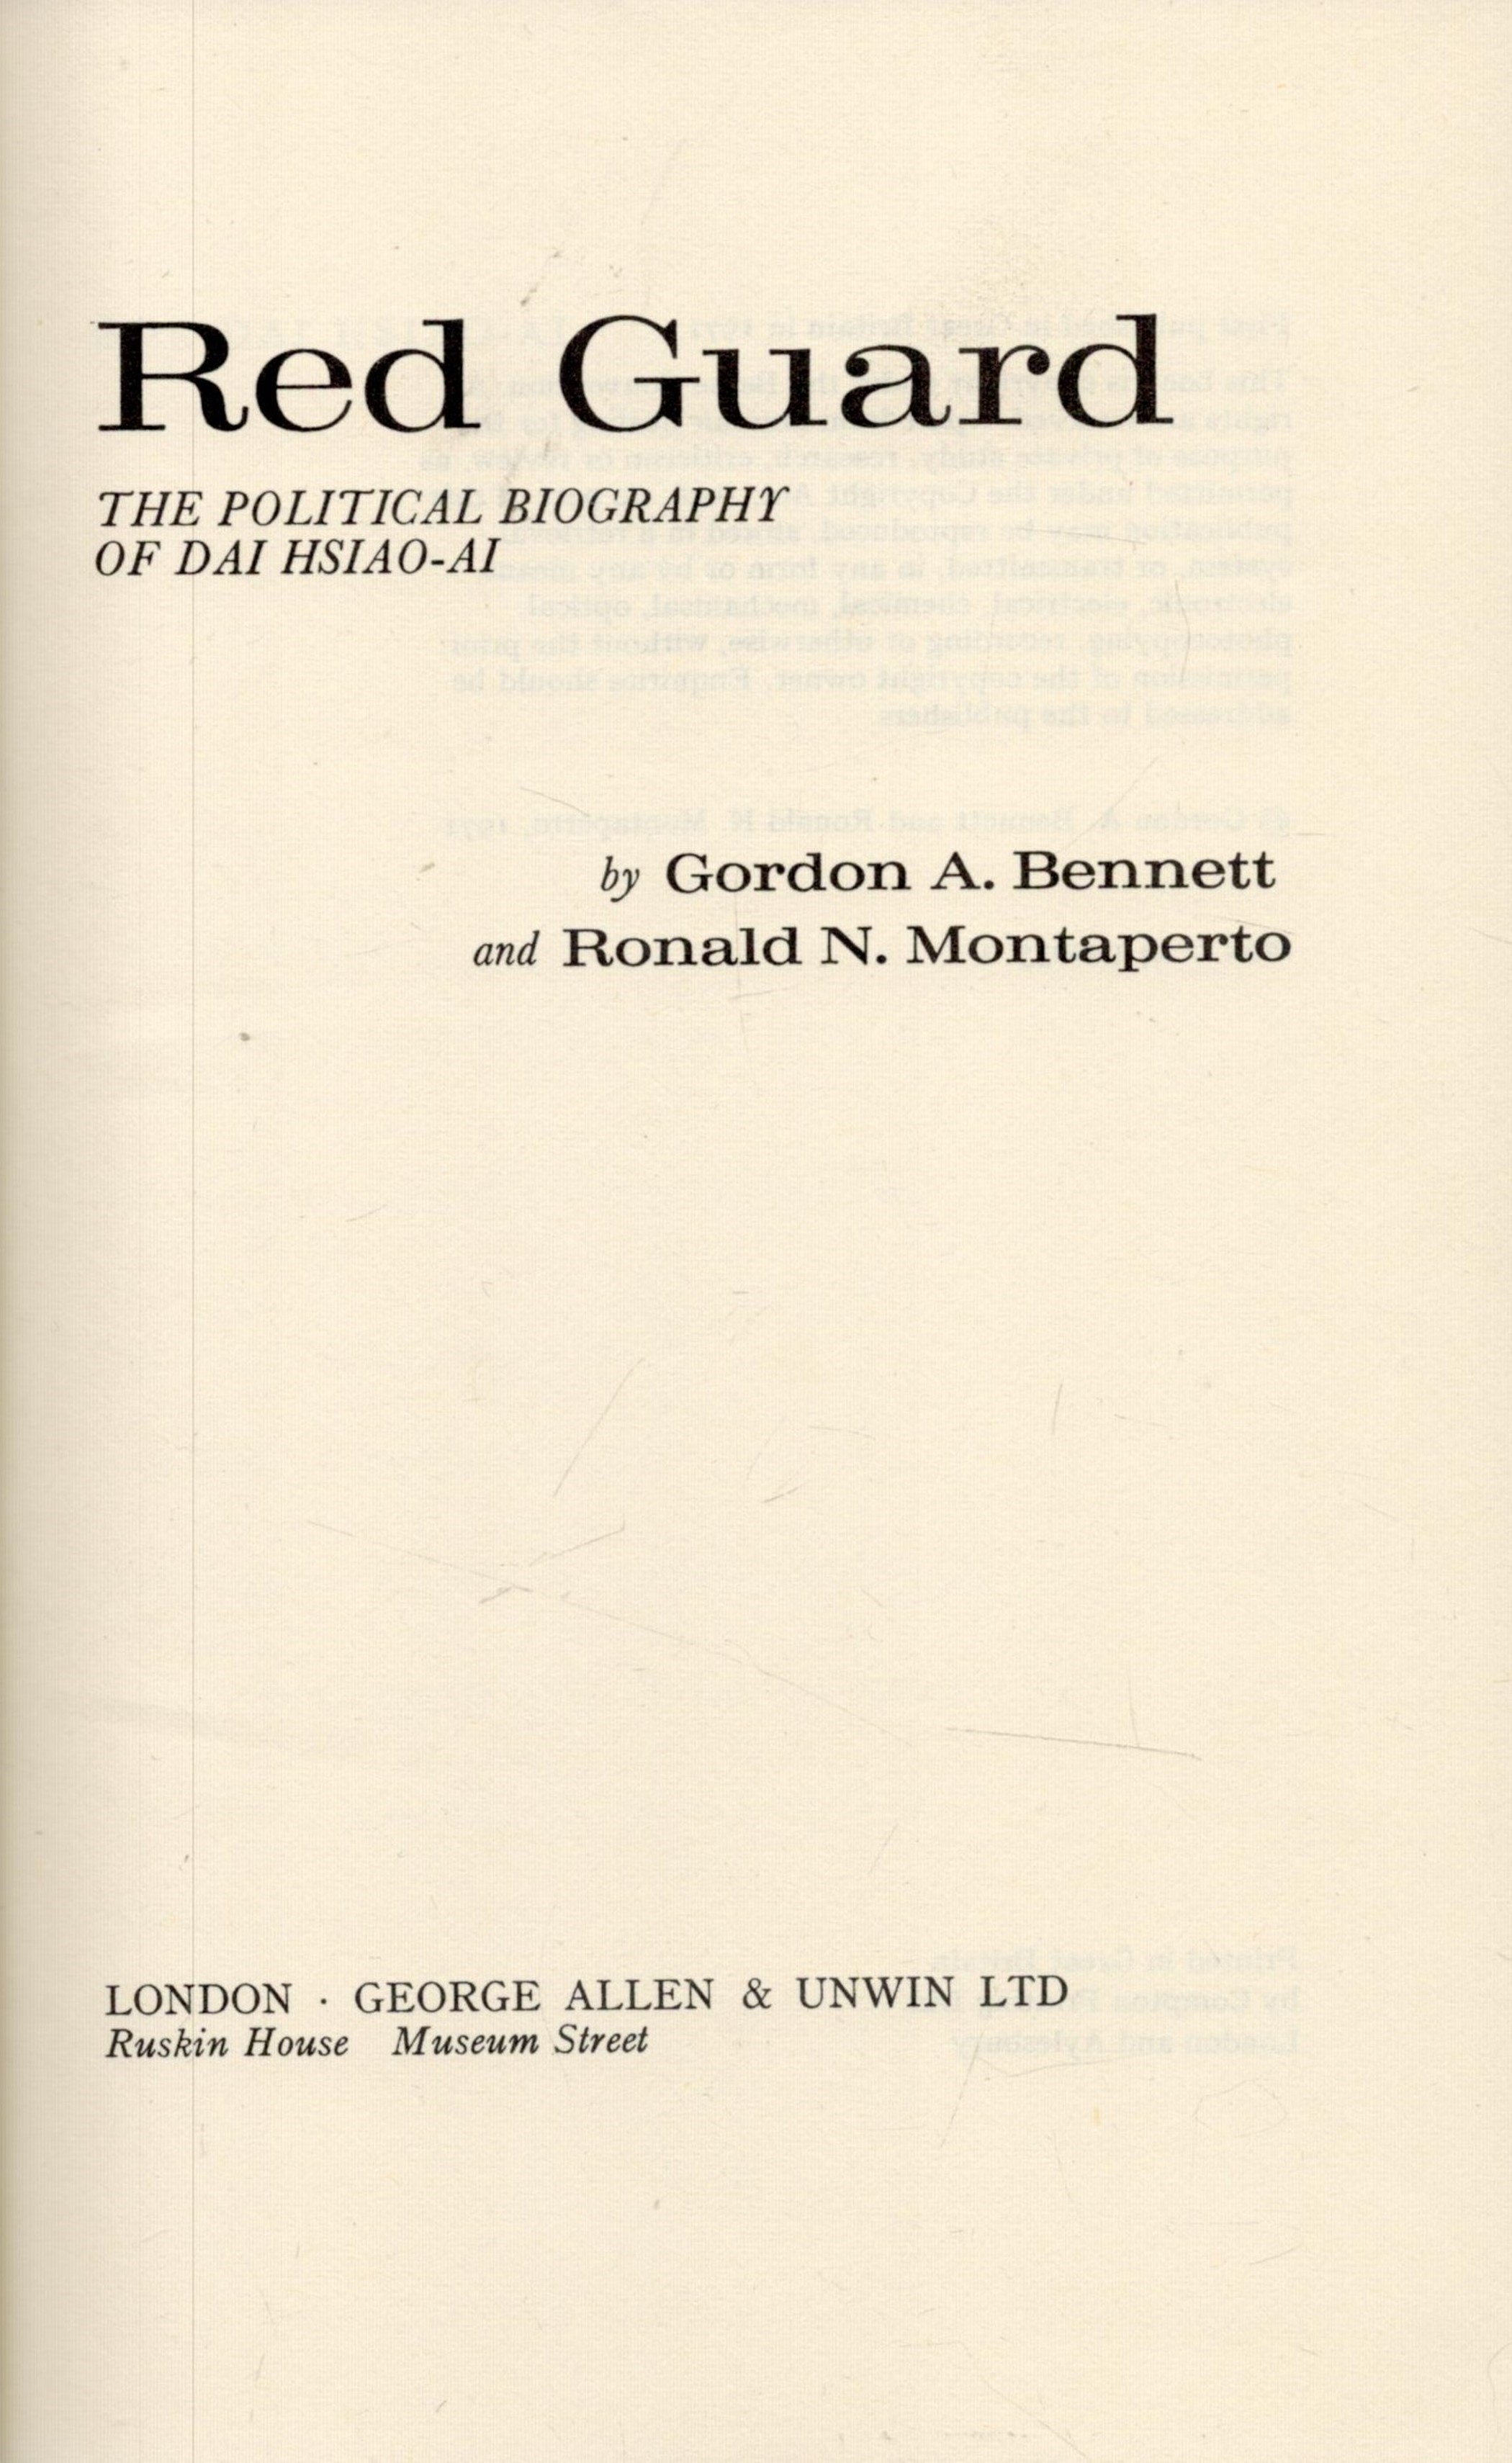 Red Guard The Political Biography of Dai Hsiao Ai by Gordon A Bennett and Ronald N Montaperto 1971 - Image 2 of 2